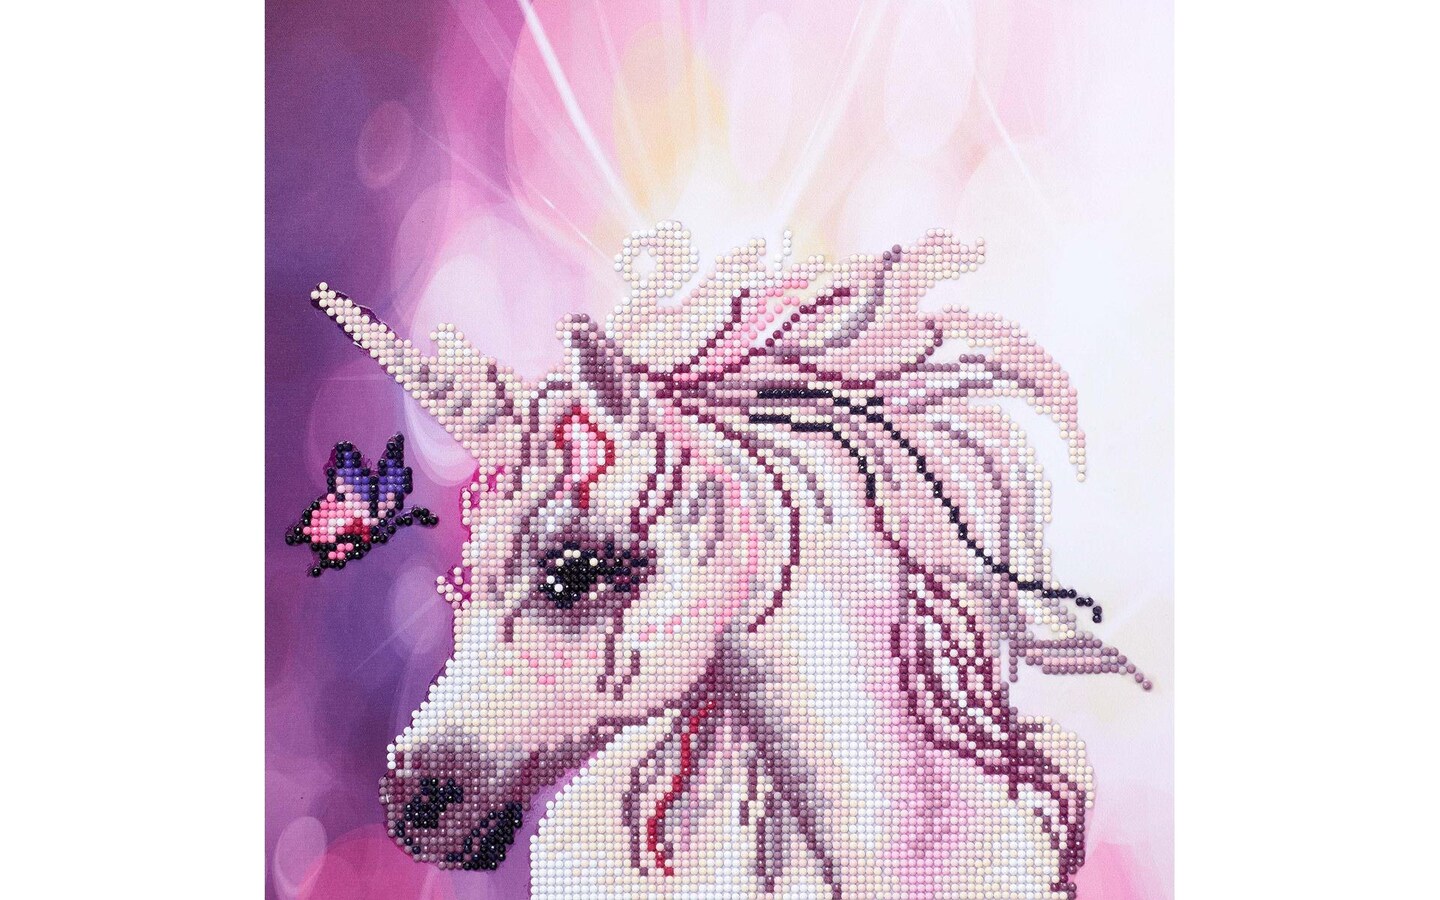 Diamond Painting for Beginners - How to Paint a Unicorn with